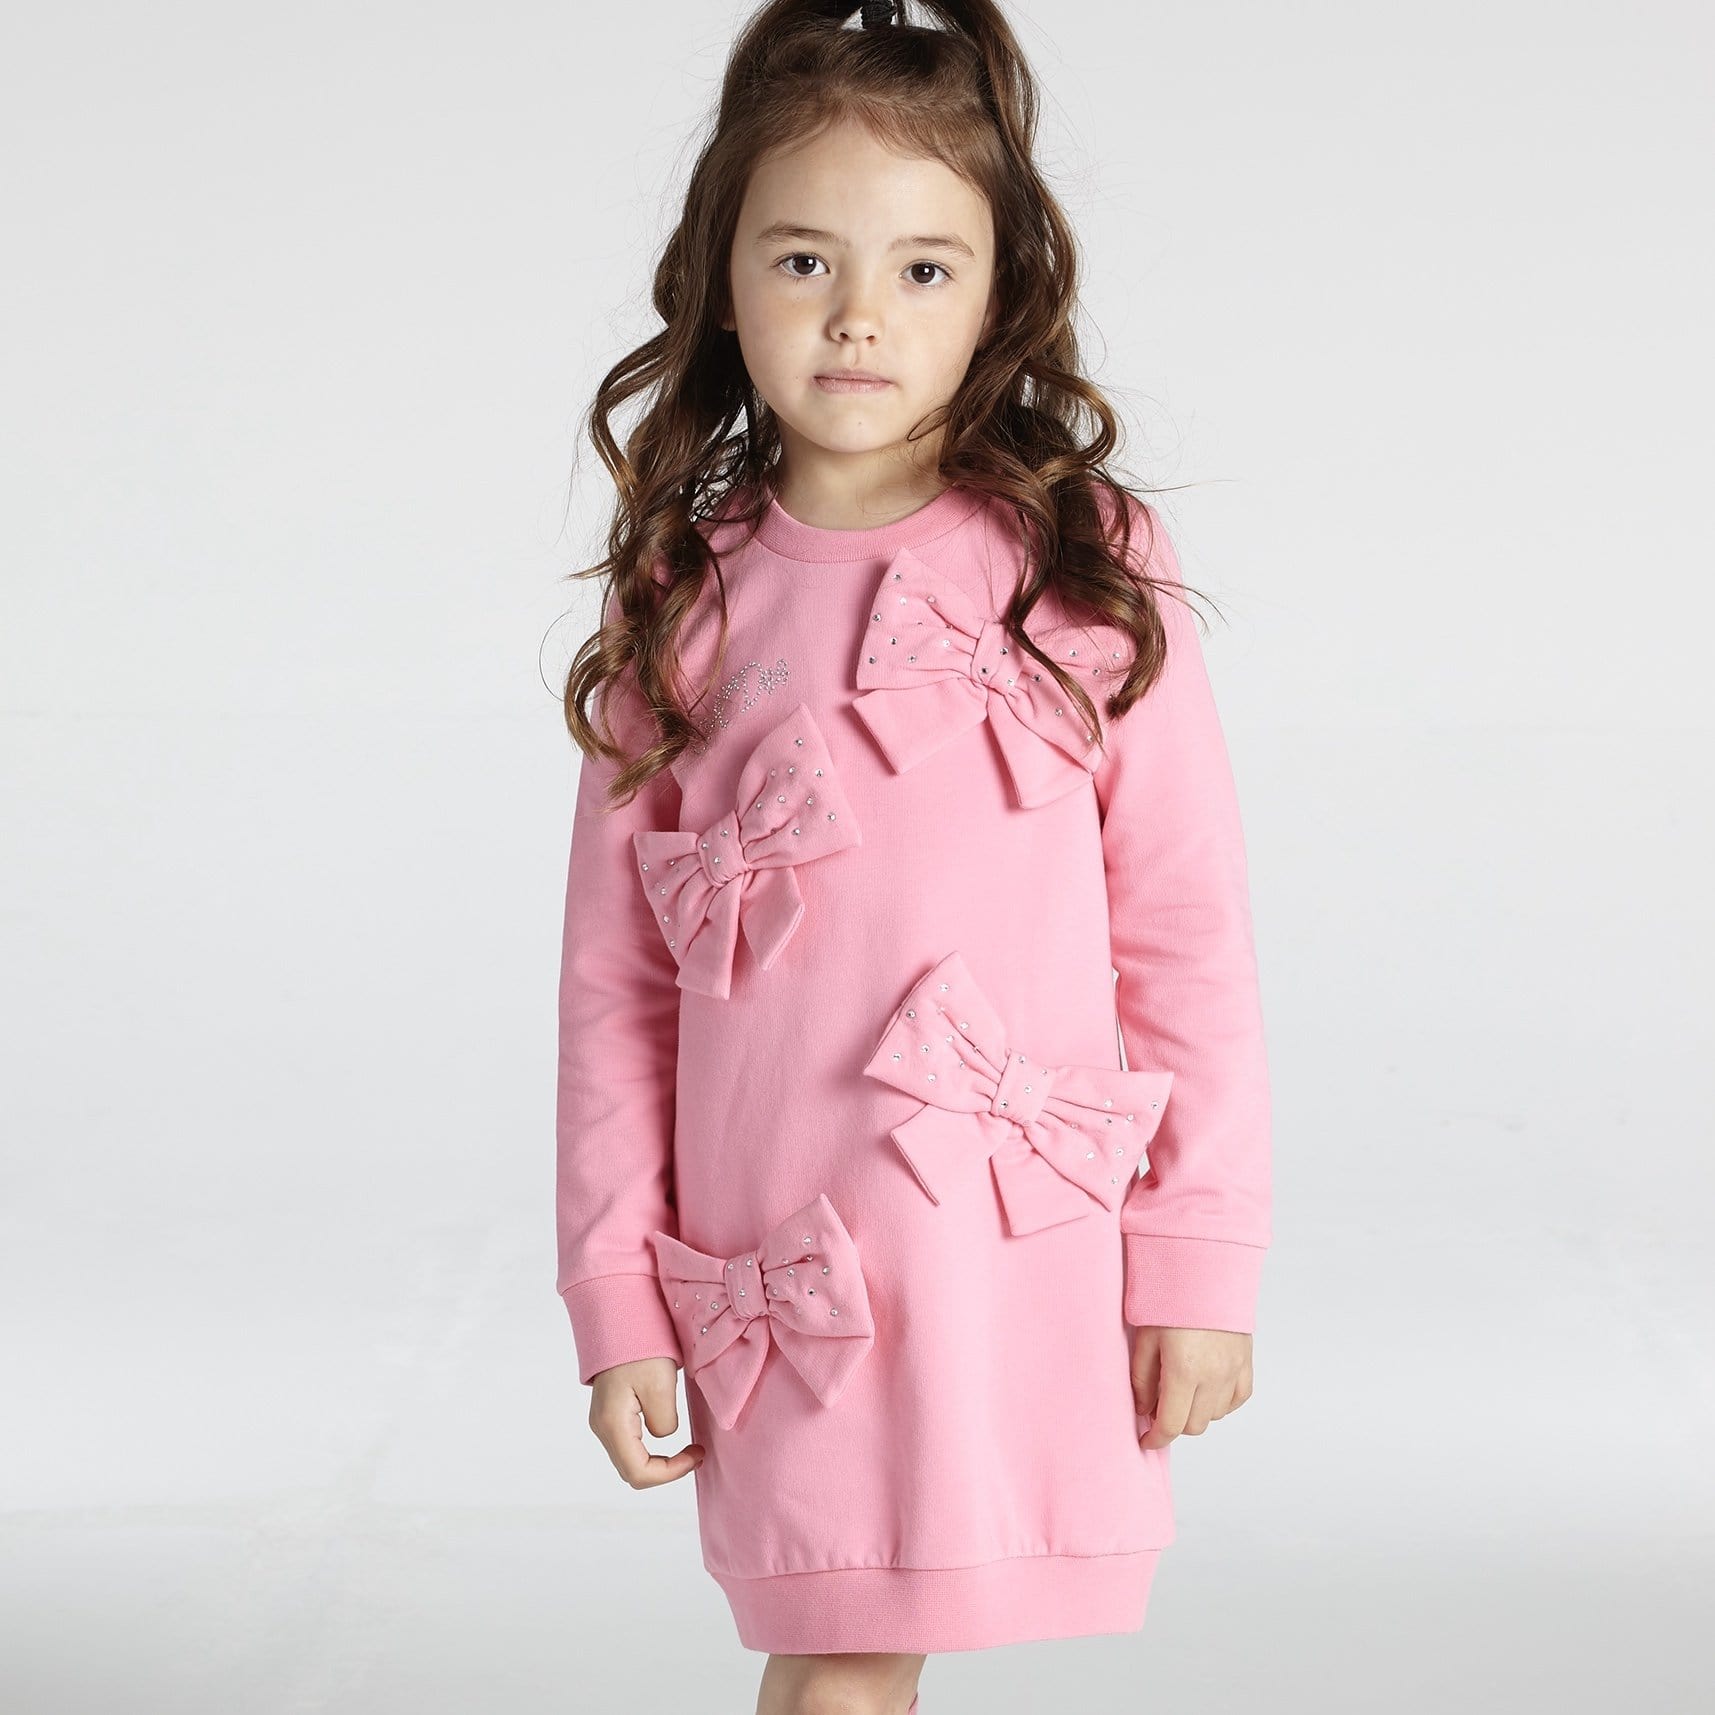 A DEE - Jumper Dress With Large Bows - Pink